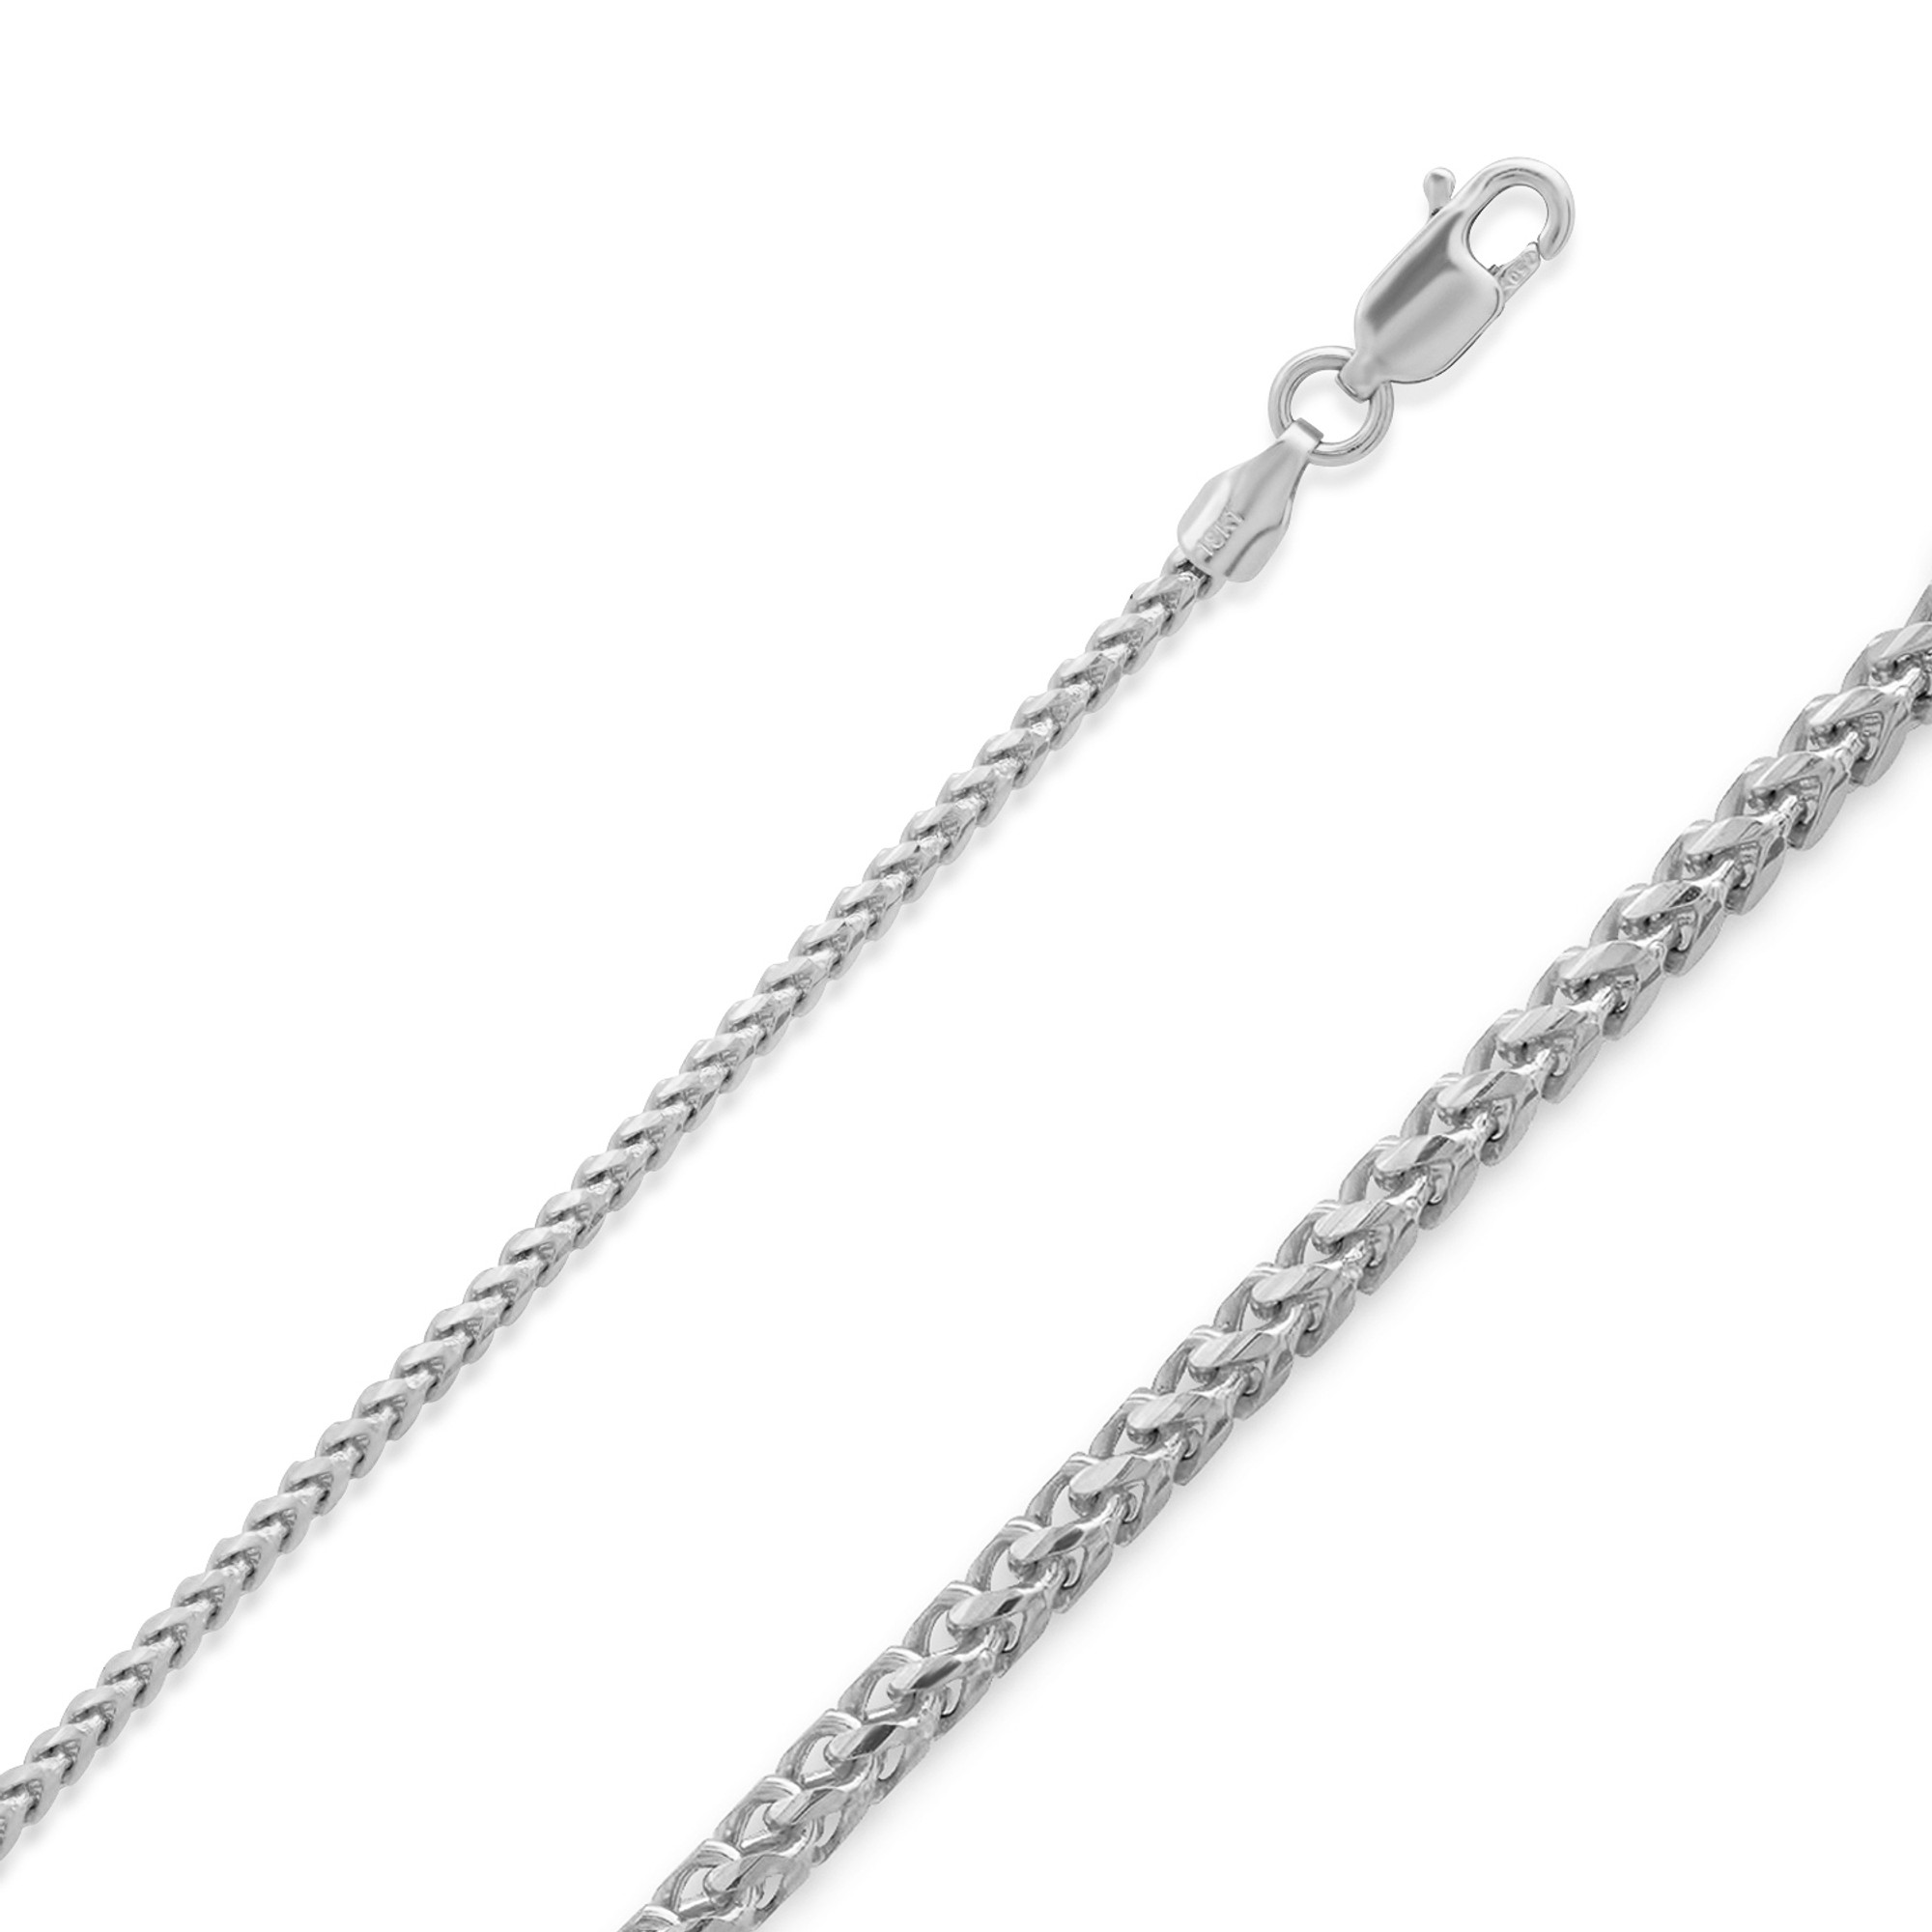 Stainless Steel 14K Gold Franco Link Chain Necklace 20 Inches / Silver